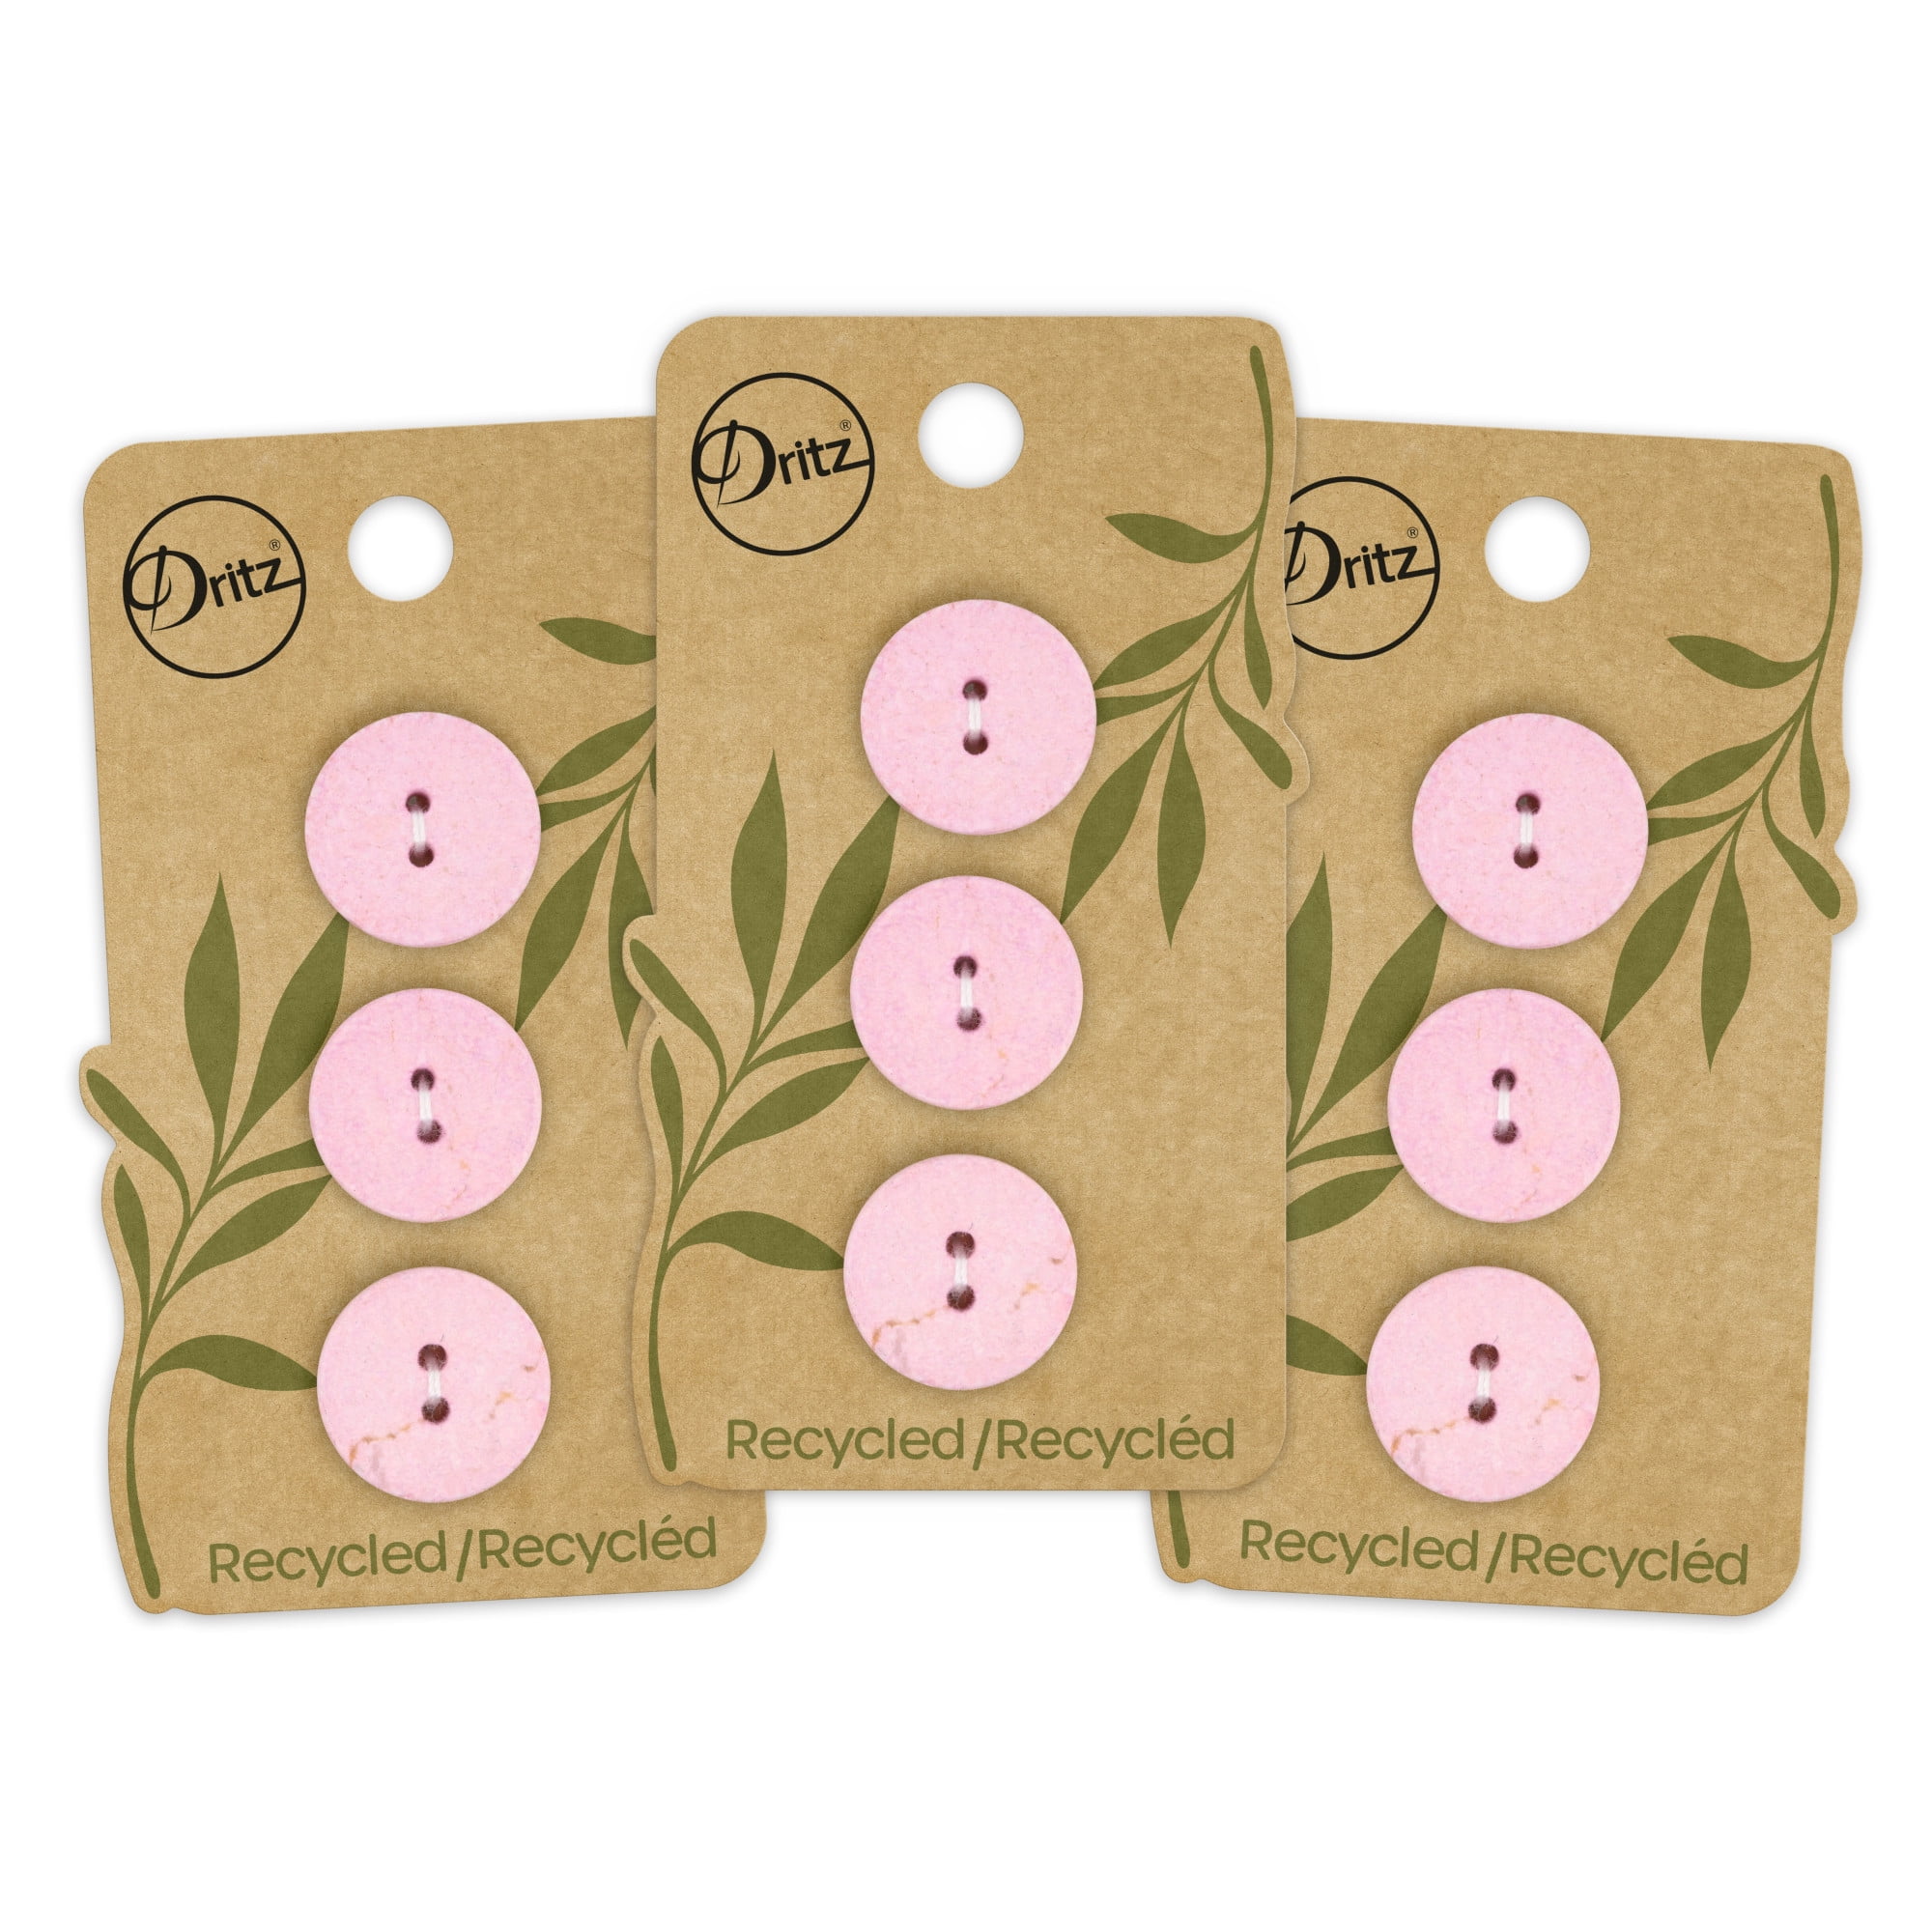 Dritz Recycled Cotton Round Stitch Button, 25mm, Natural, 3 Pack (6 Count)